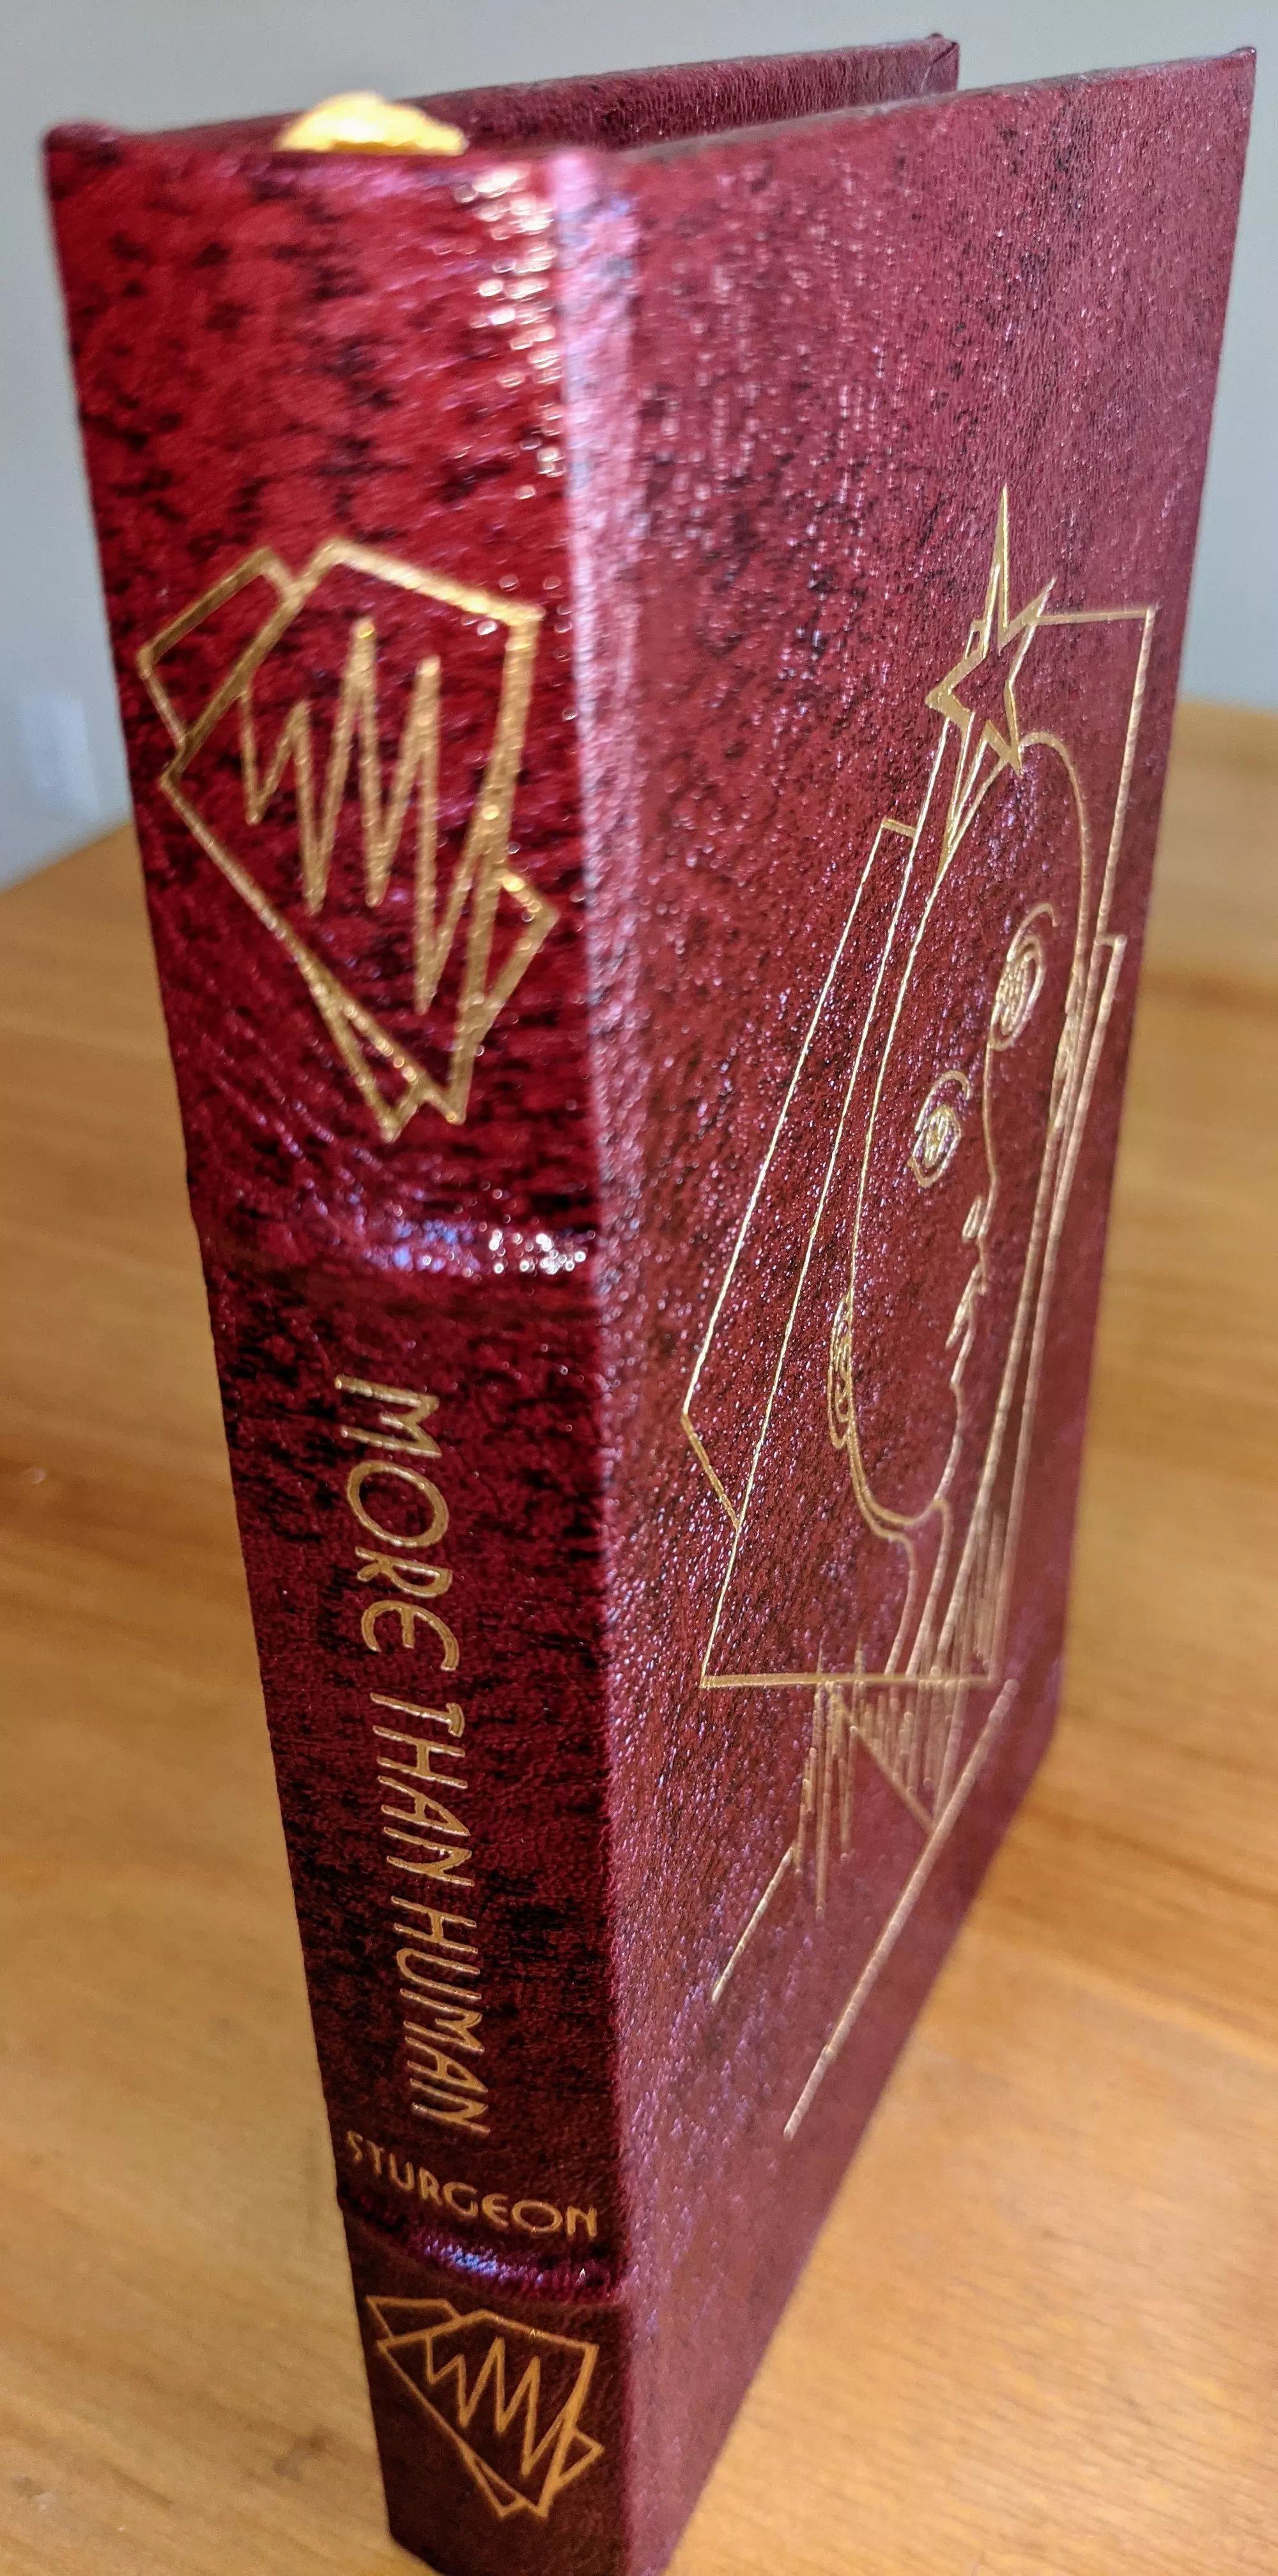 Stunning Red & Black Leather Bound hardback book with hubbed spine, cover artwork in 22kt gold, printed on archival paper with gold gilded edges, smyth sewing & concealed muslin joints
	  - original artwork by Jeff Fisher